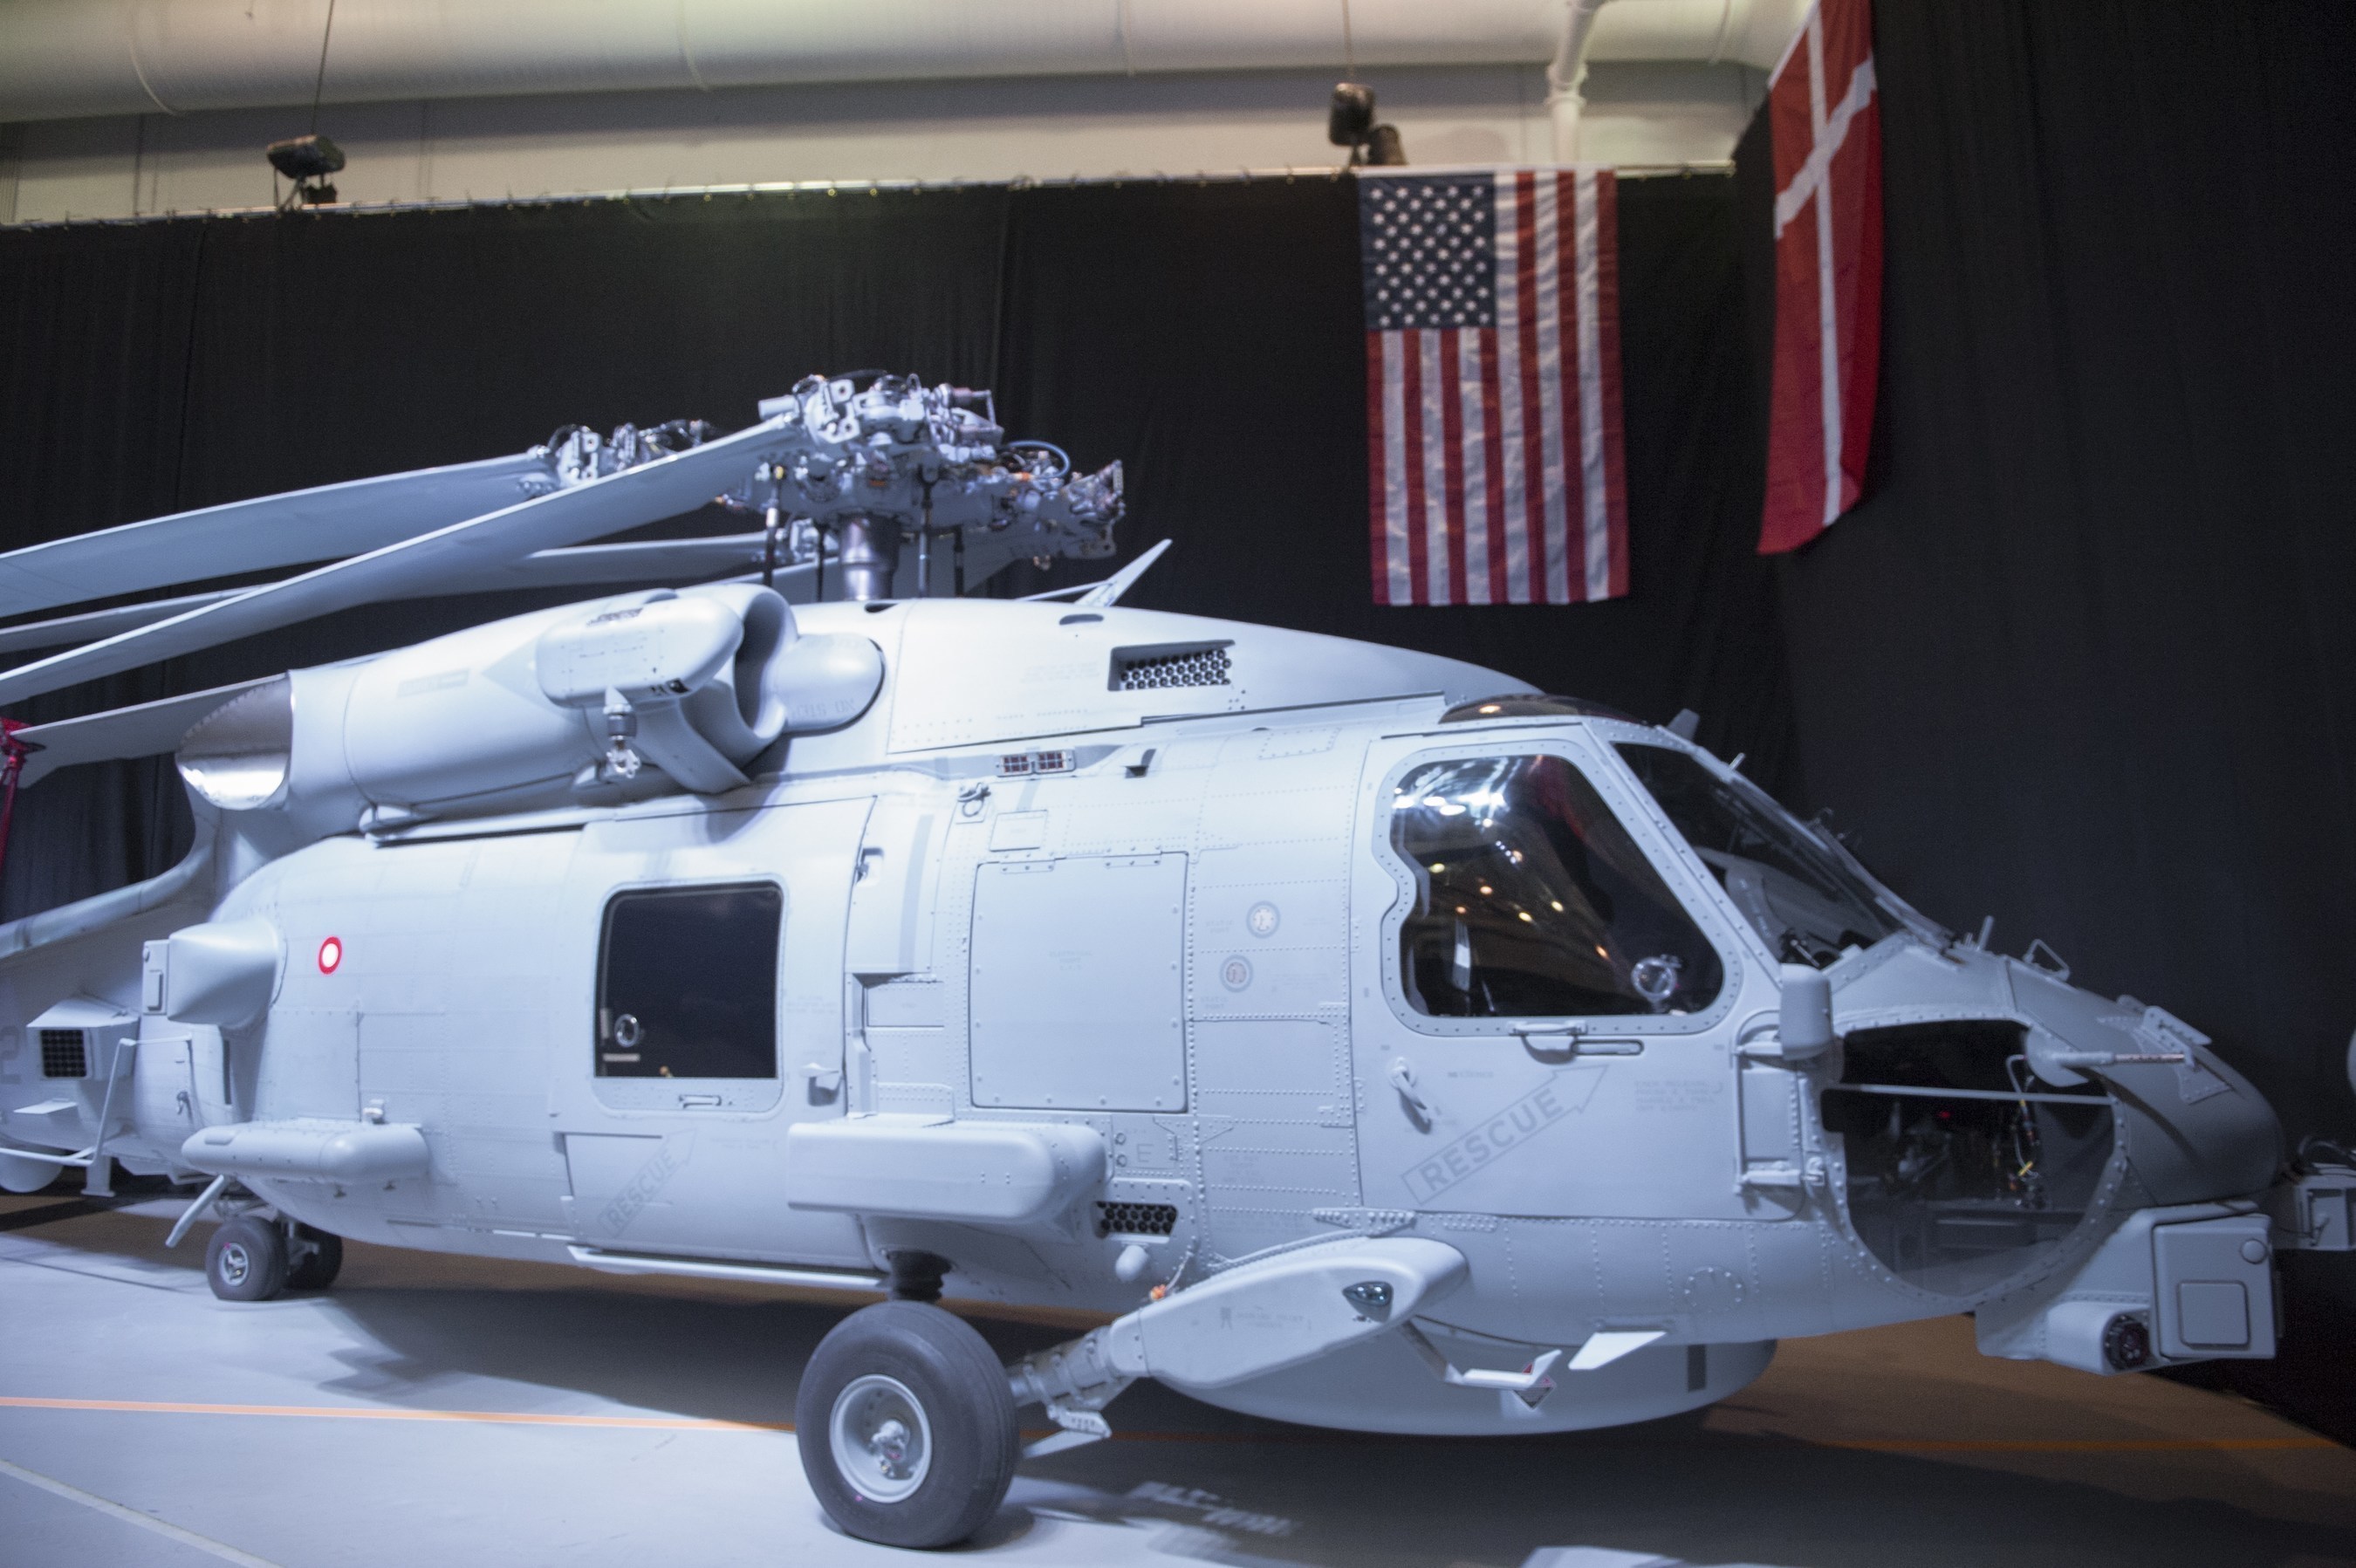 The U.S. Navy accepted the first Danish MH-60R "Romeo" aircraft in a ceremony today.